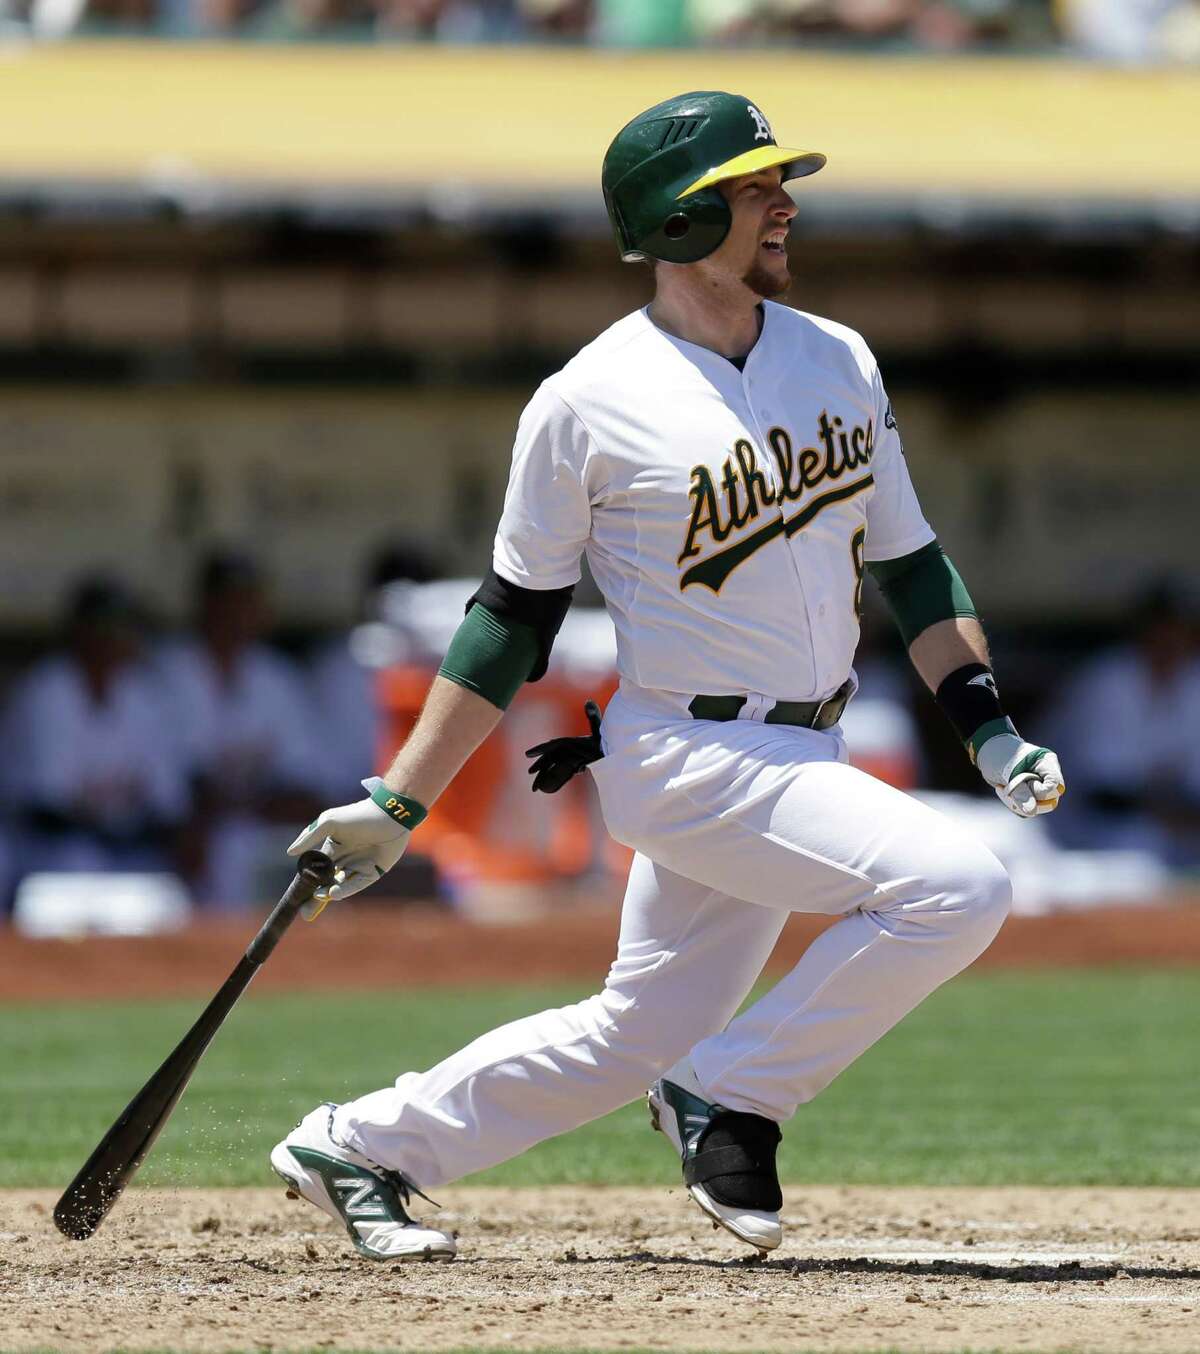 Switch-hitting infielder Jed Lowrie batted .249 with 15 homers for the A's last season.